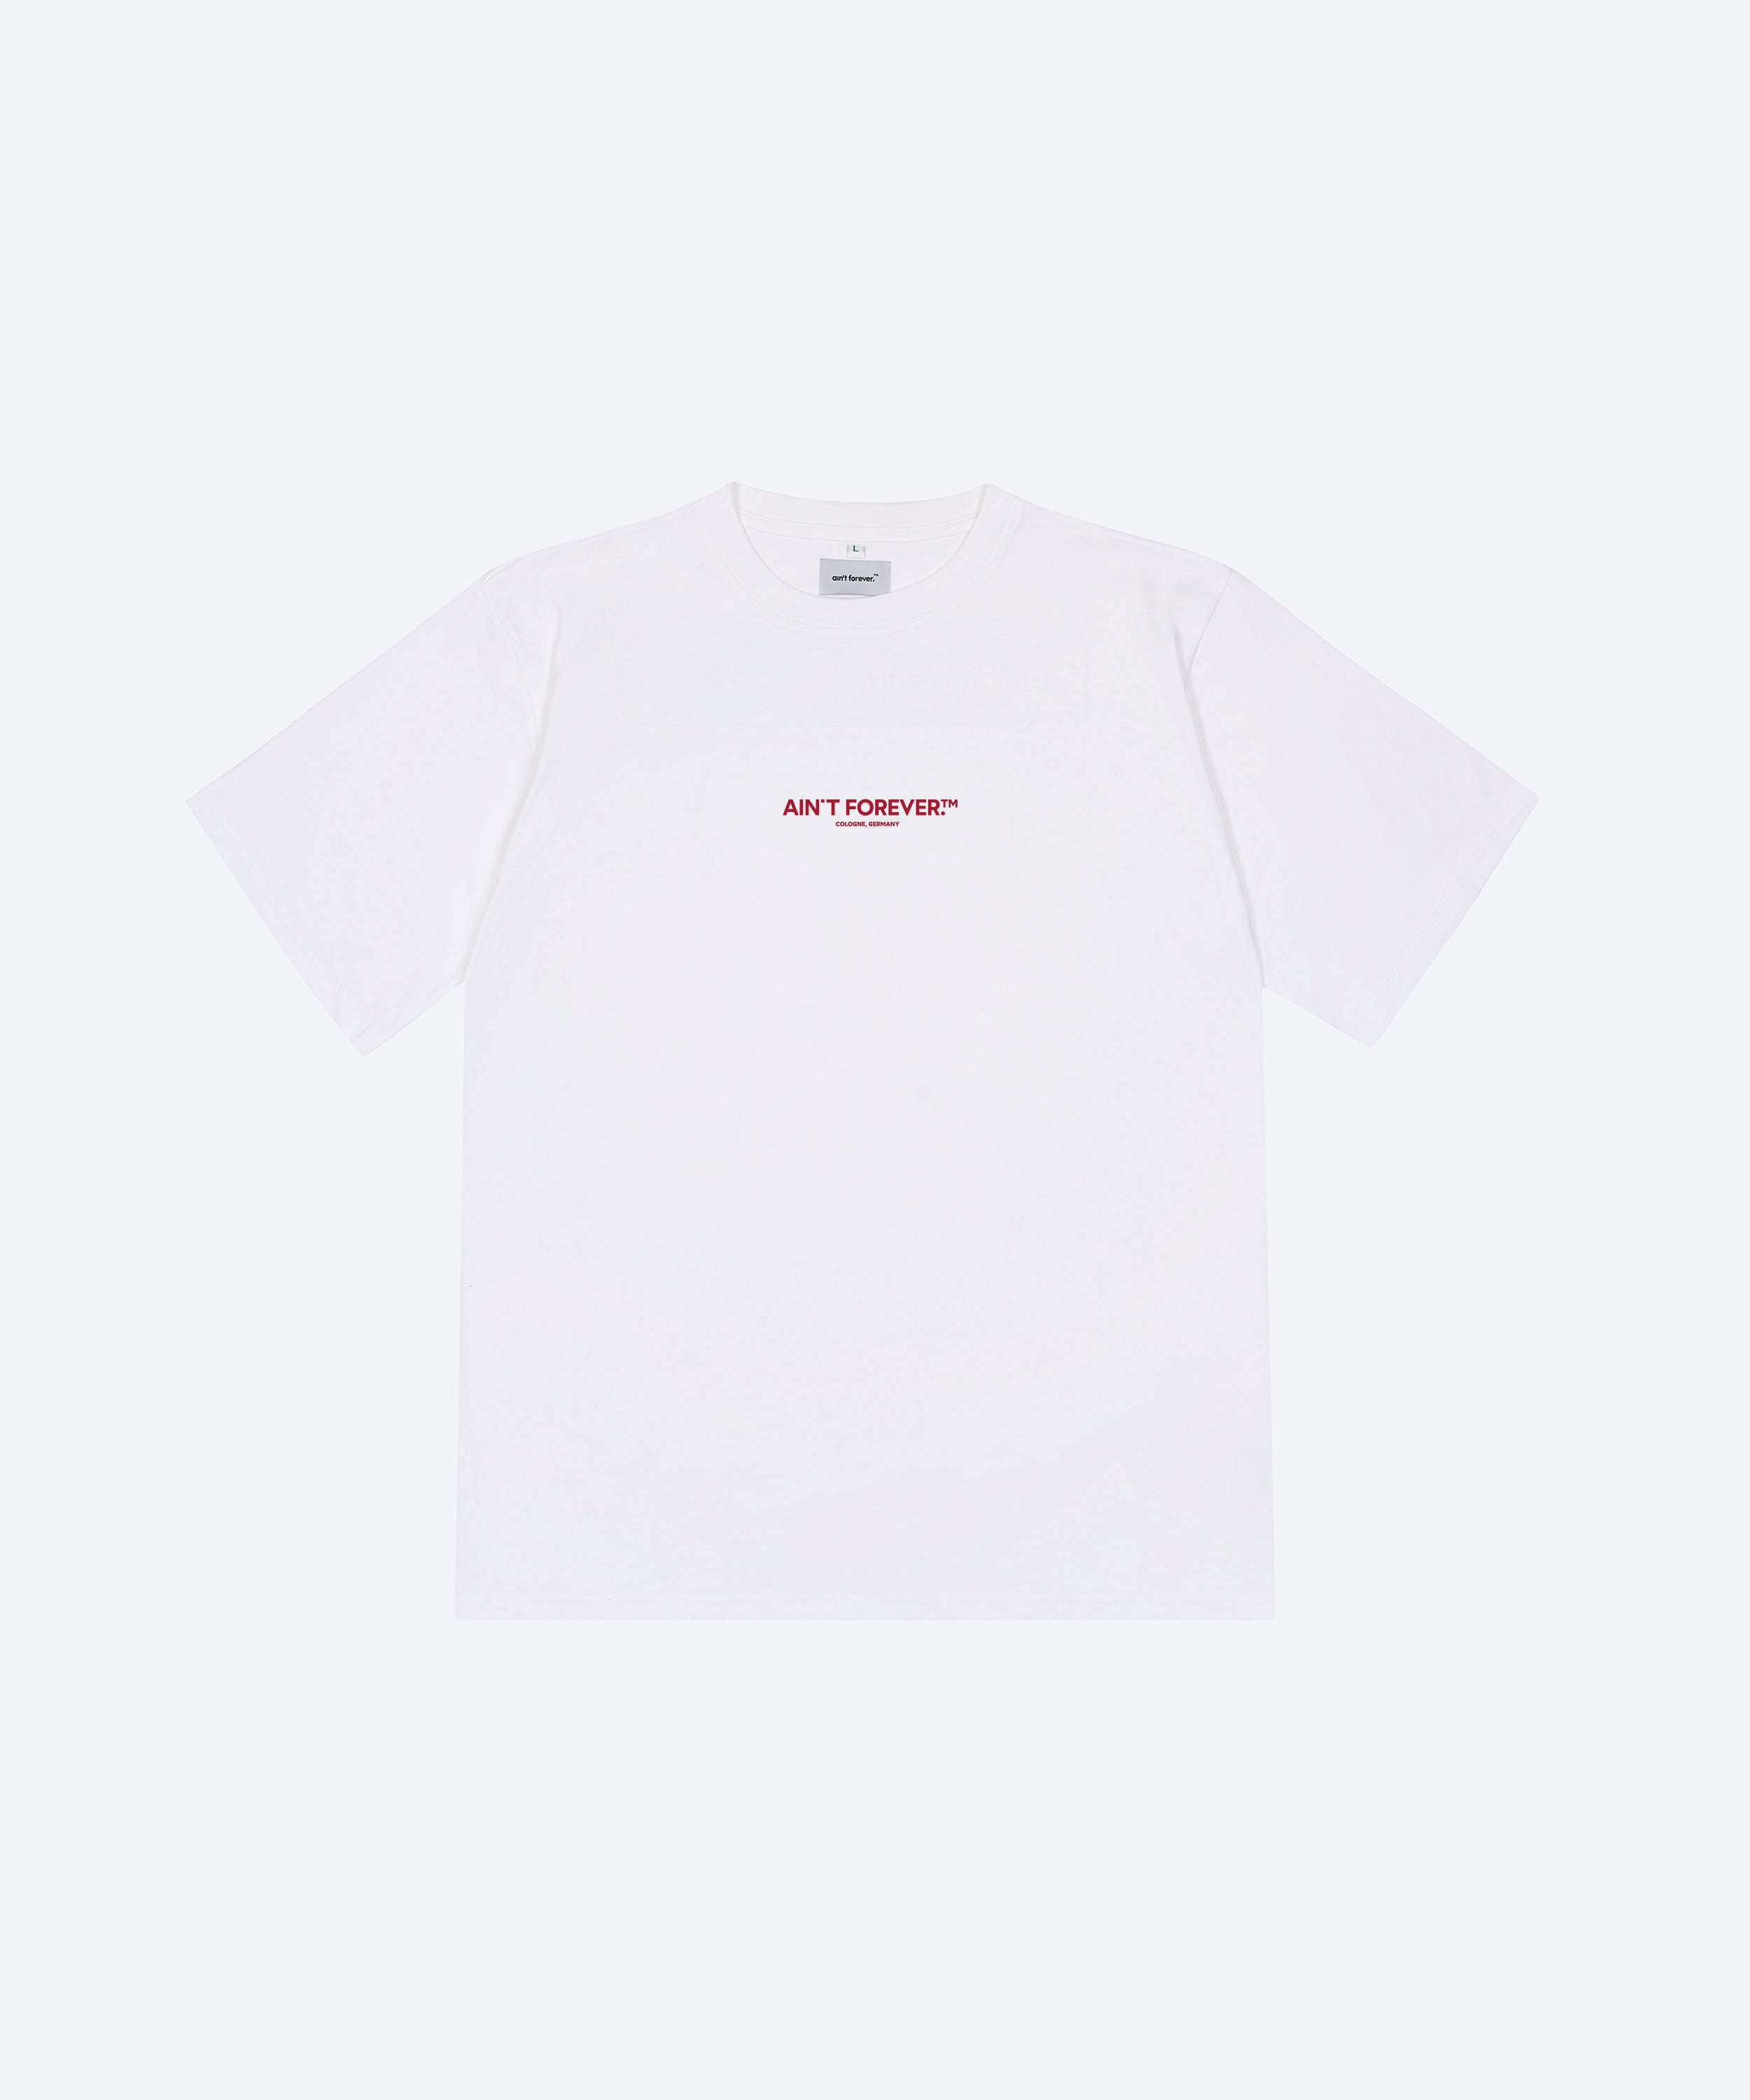 THE DEPARTURES T-SHIRT (WHITE / RED)